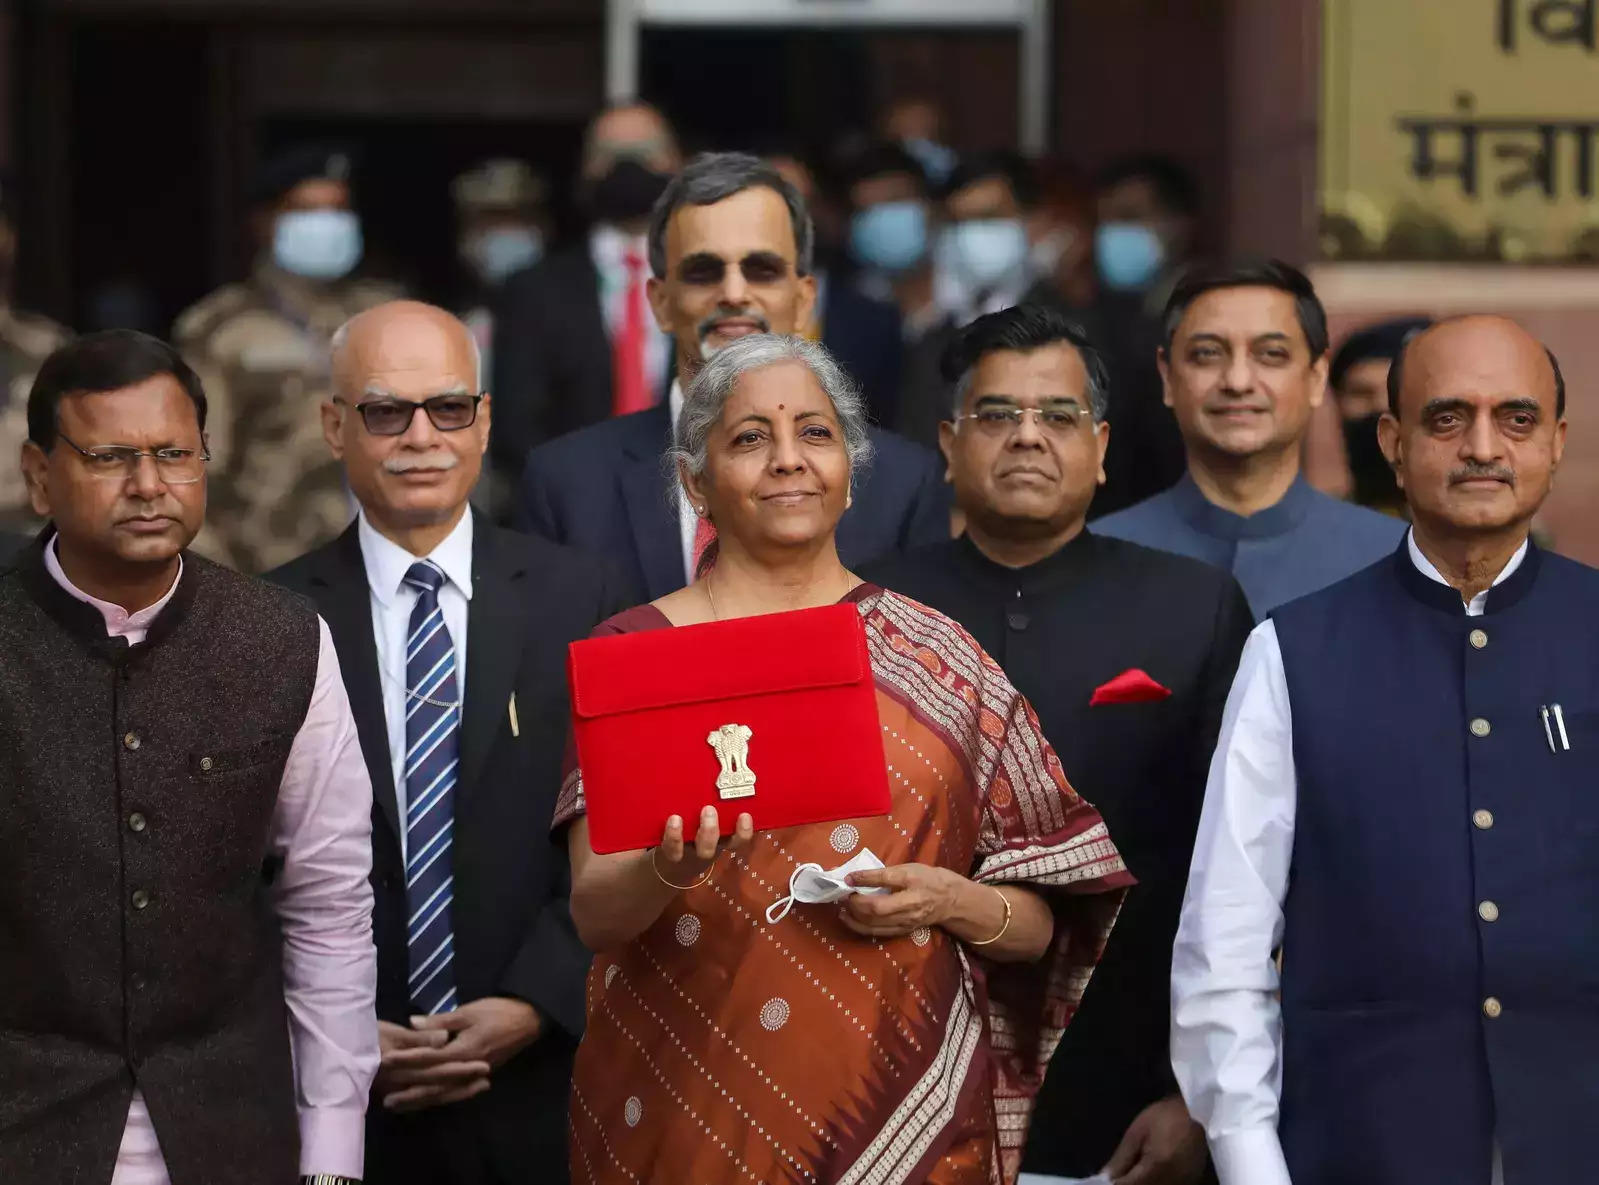 Union Budget 2023-24: Experts dub health budget ‘disappointing’